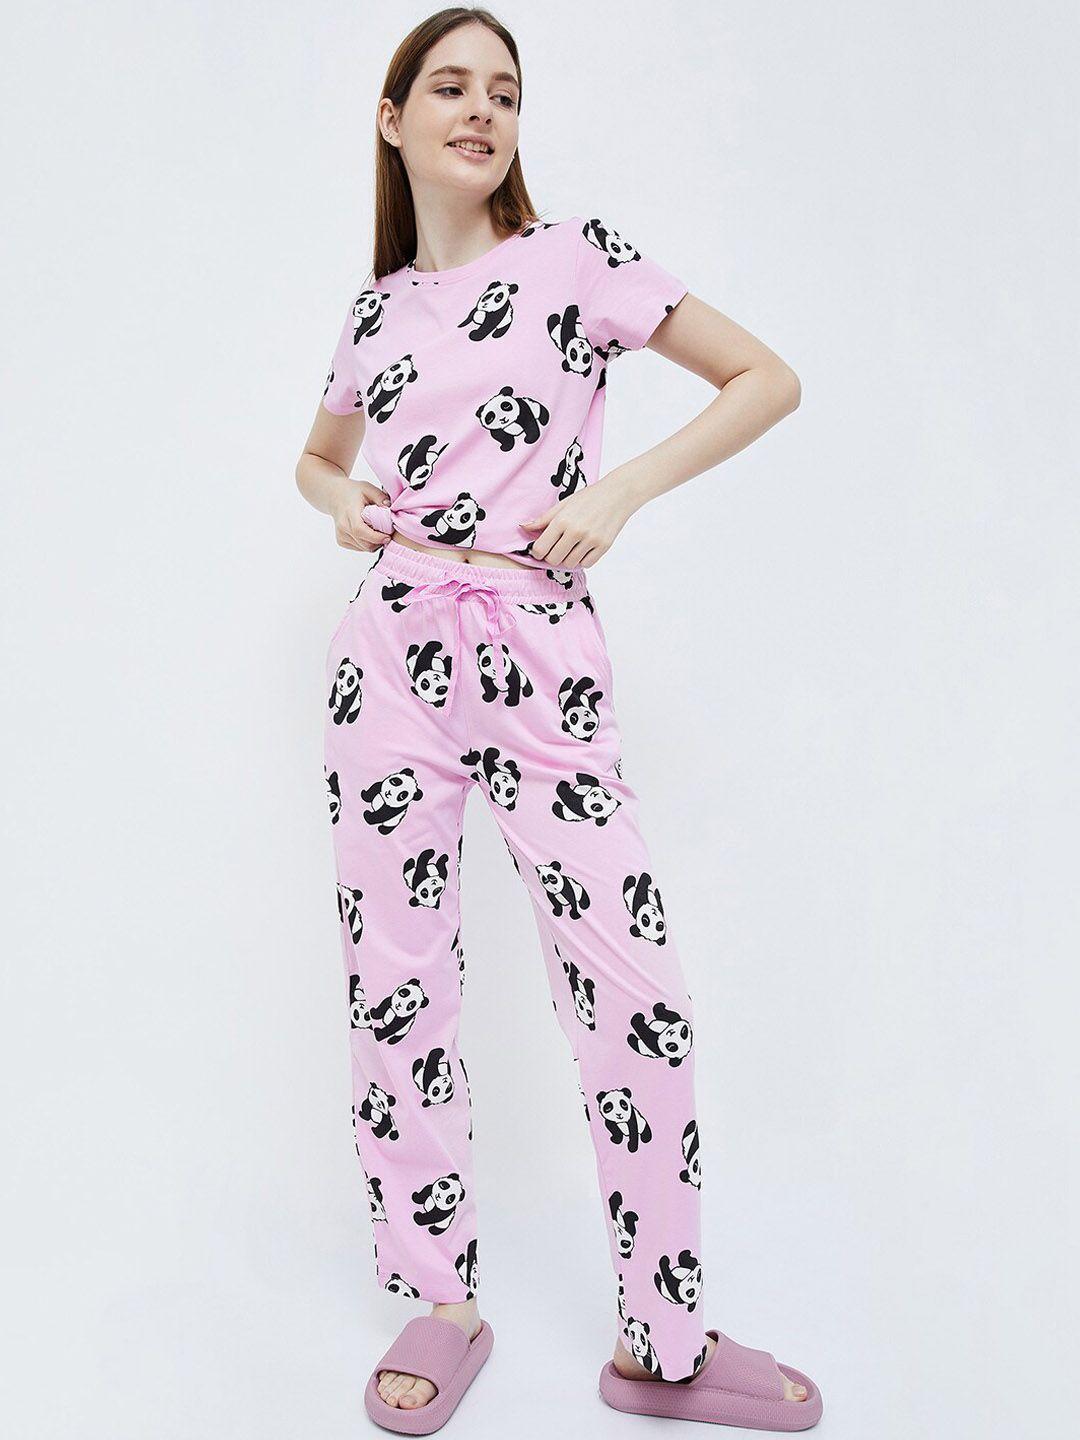 ginger-by-lifestyle-panda-printed-night-suit